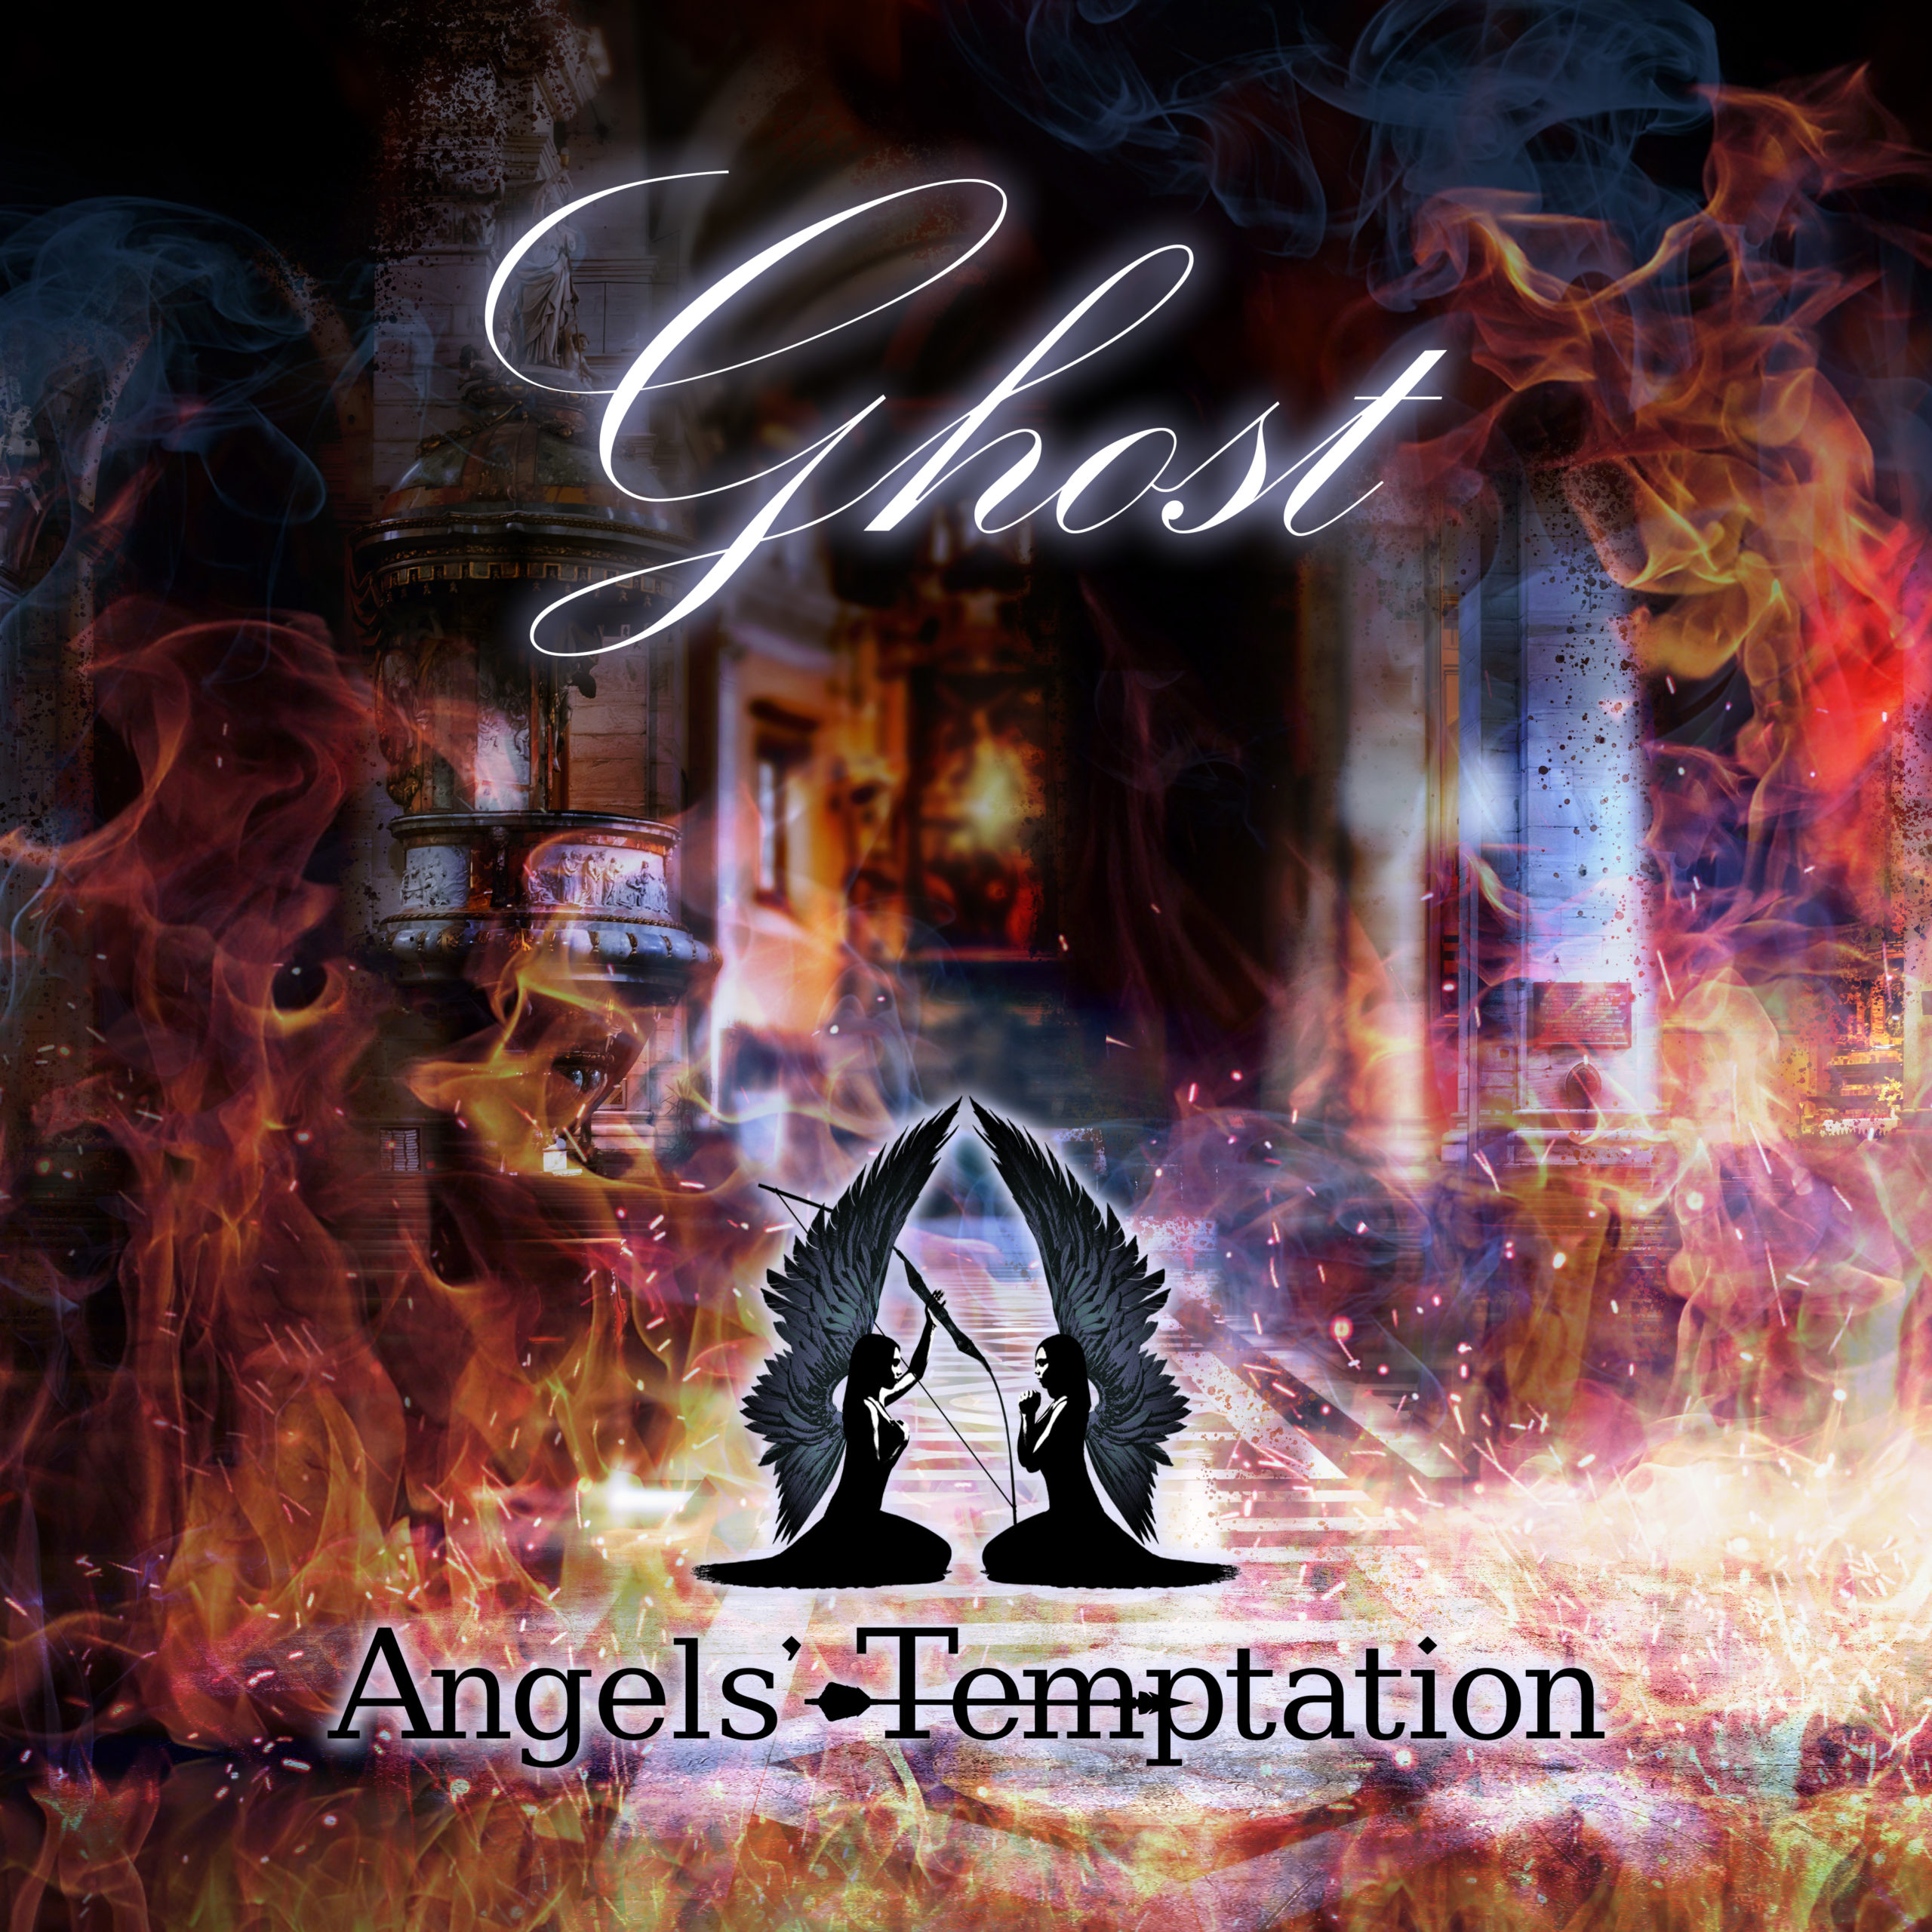 Angels’ Temptation 3rd Single「Ghost」Release